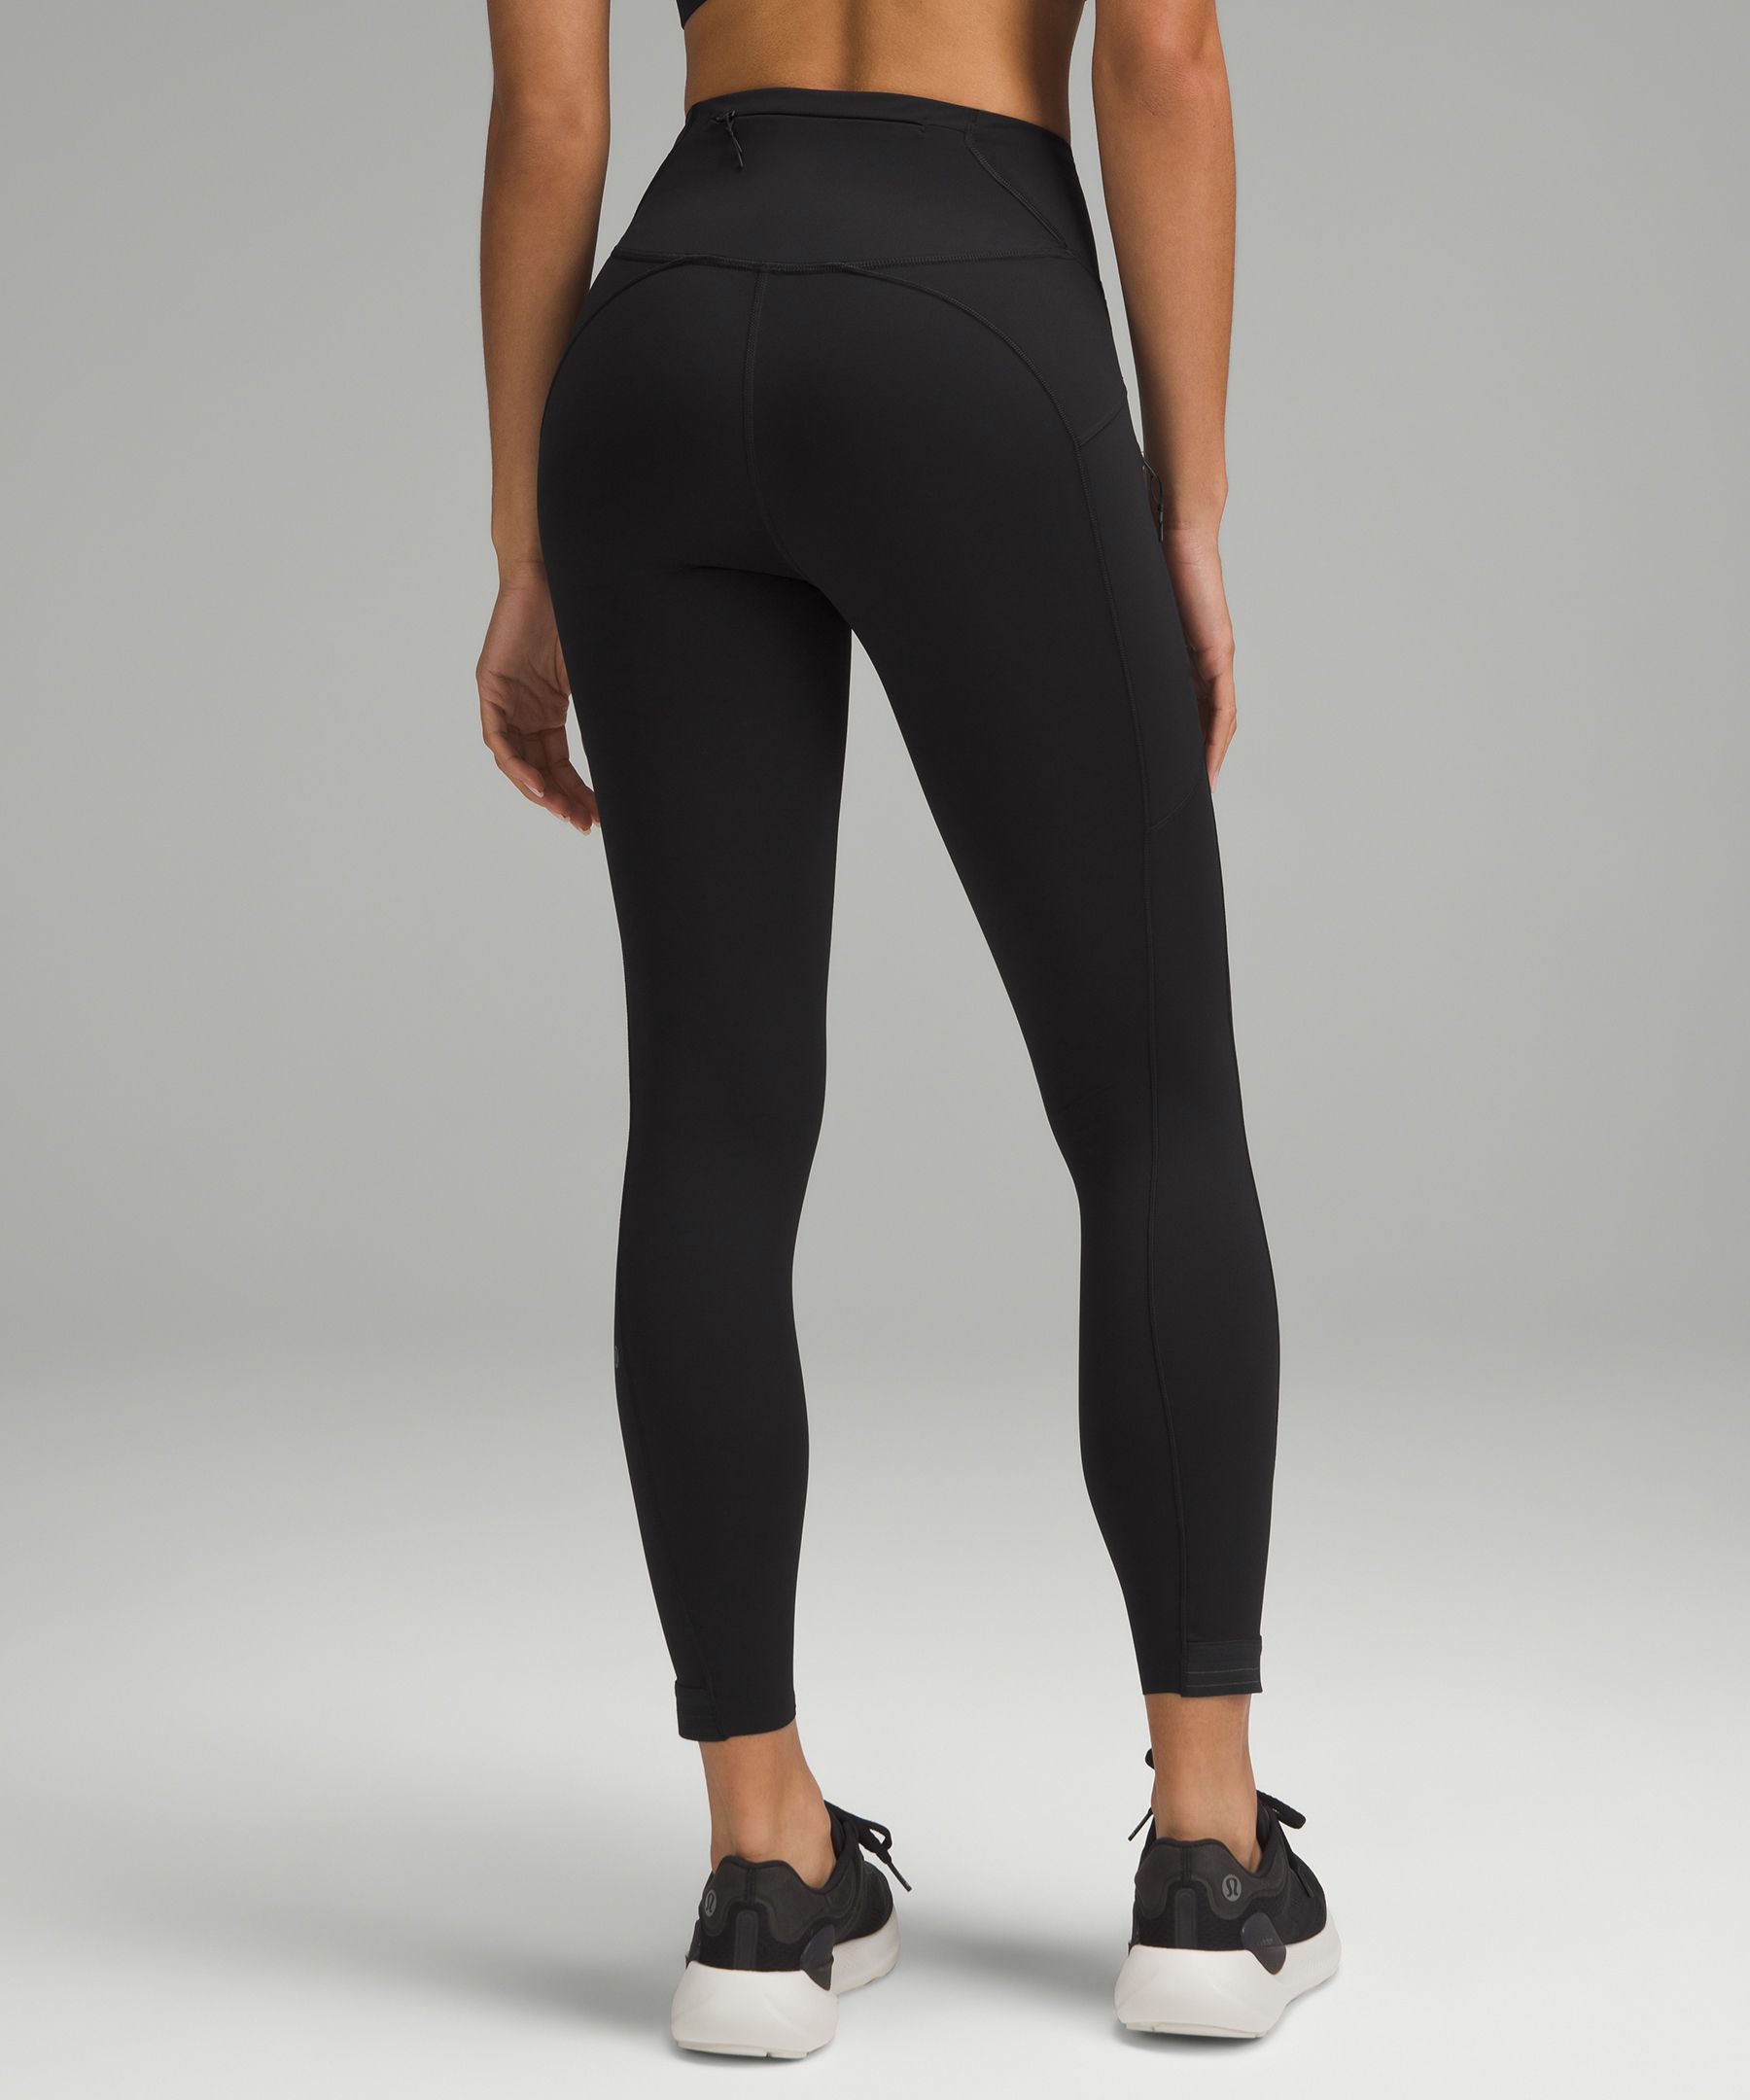 Fast and Free High-Rise Tight 25" 3 Pockets *Glow | Women's Leggings/Tights